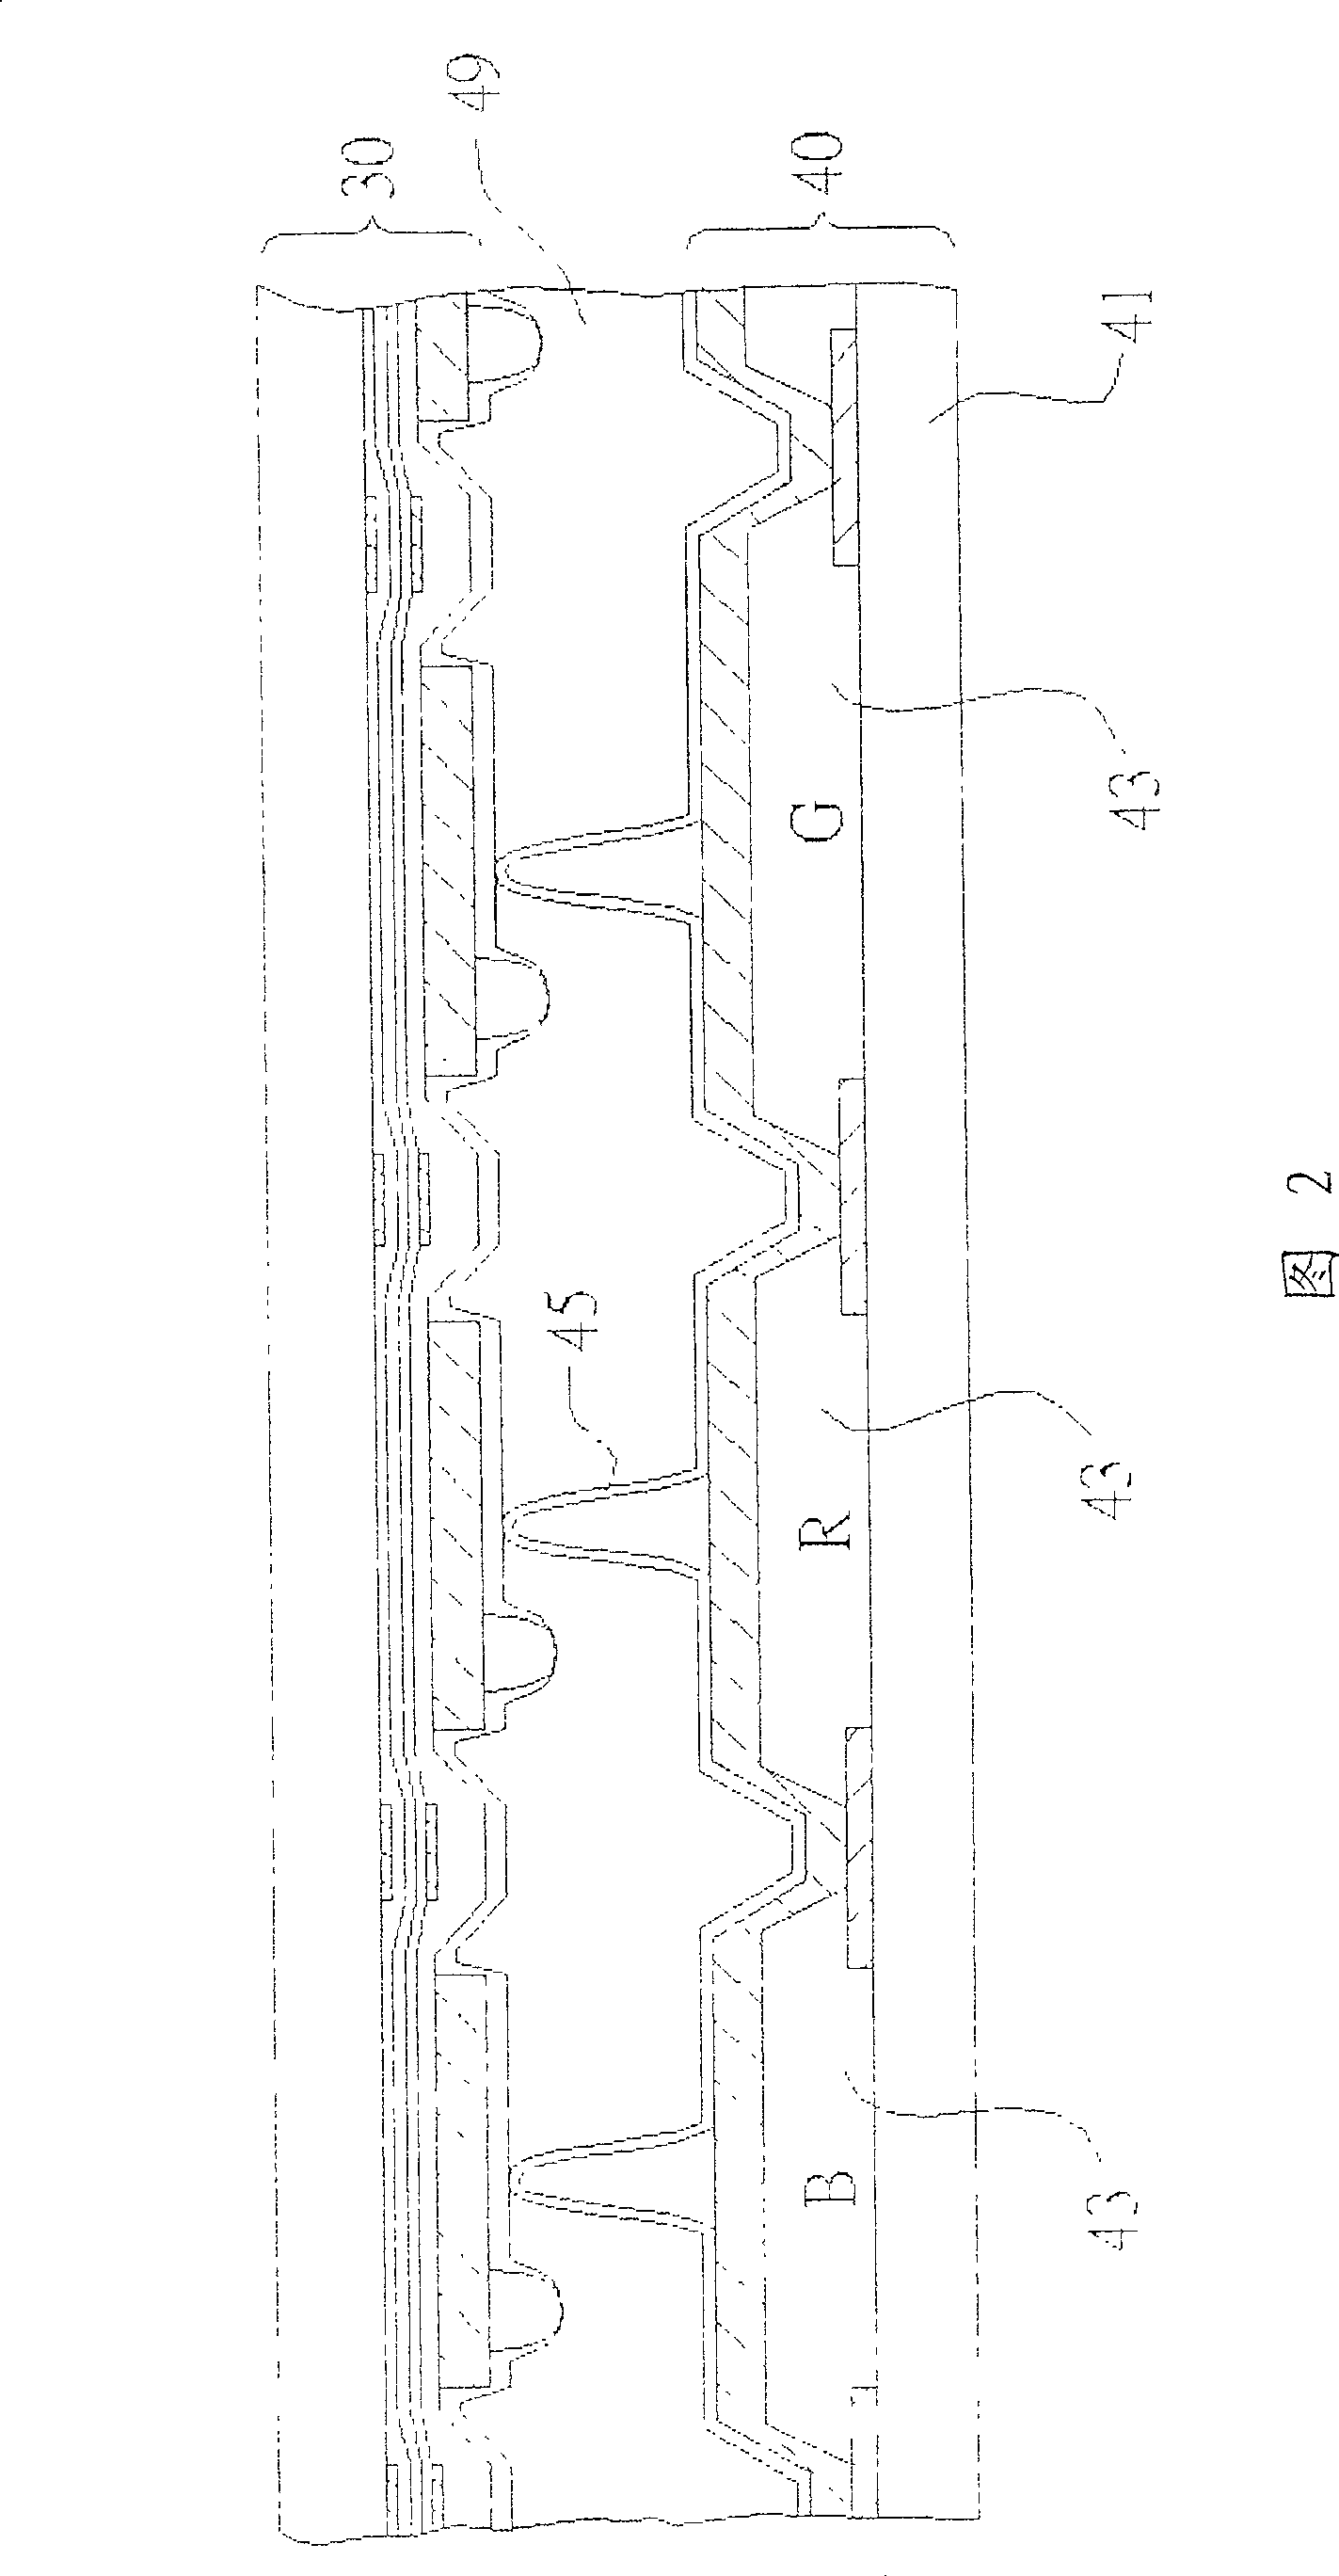 Liquid-crystal device and production thereof